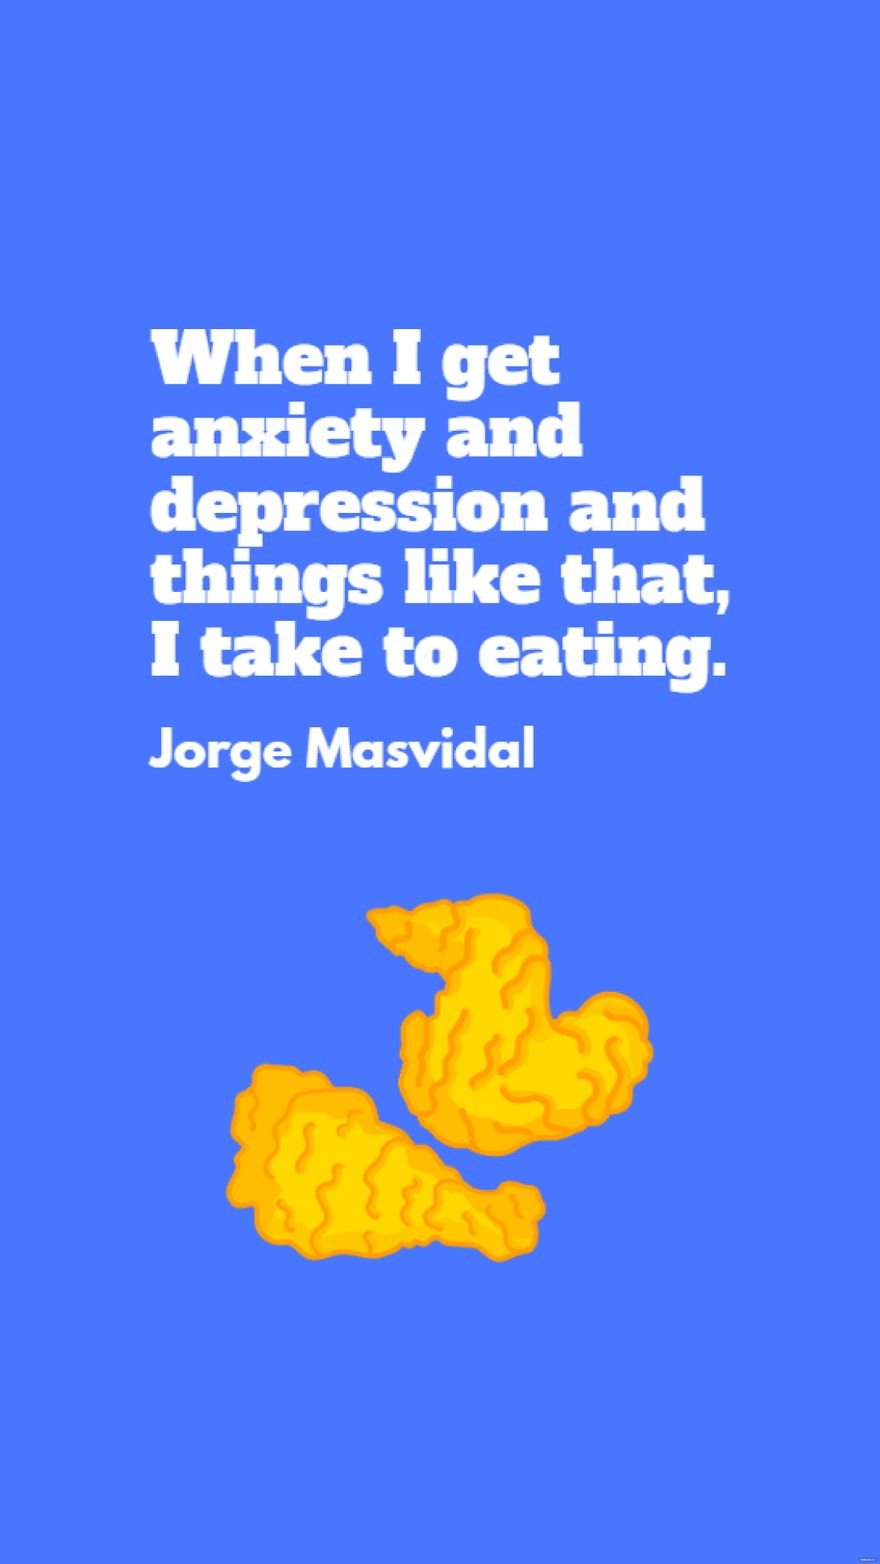 Free Jorge Masvidal - When I get anxiety and depression and things like that, I take to eating.